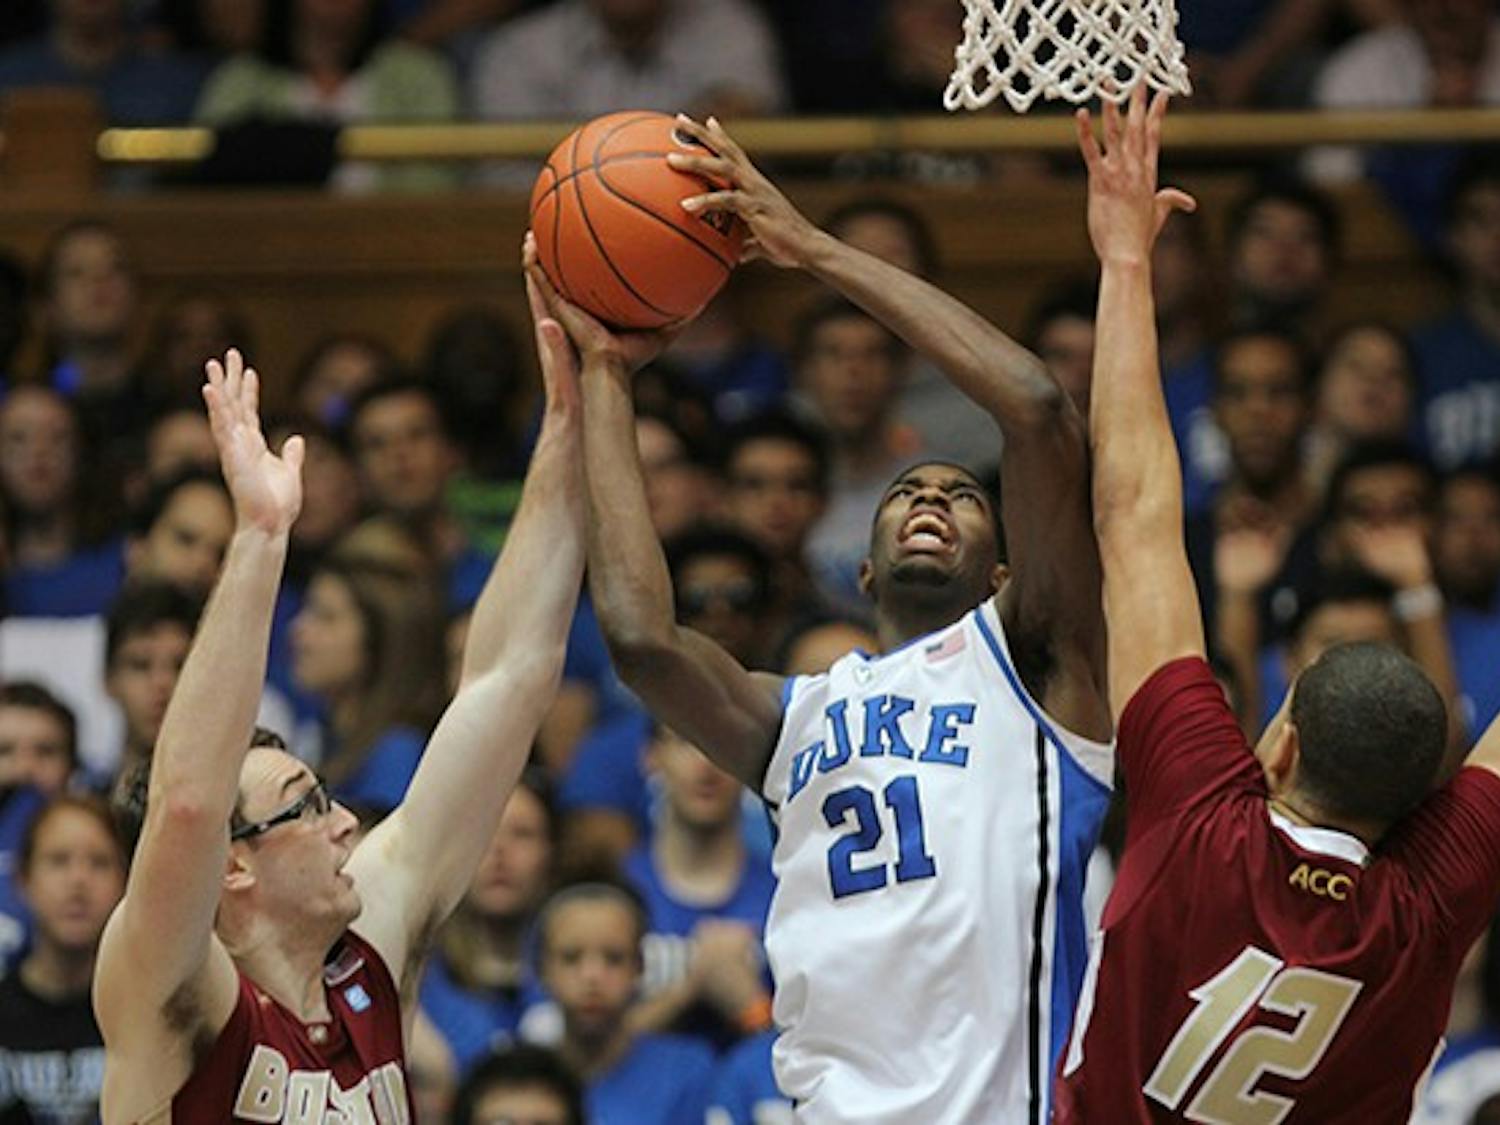 The No. 5 Duke men's basketball team defeated Boston College 89-68, led by a career-high 27 points from freshman guard Rasheed Sulaimon.